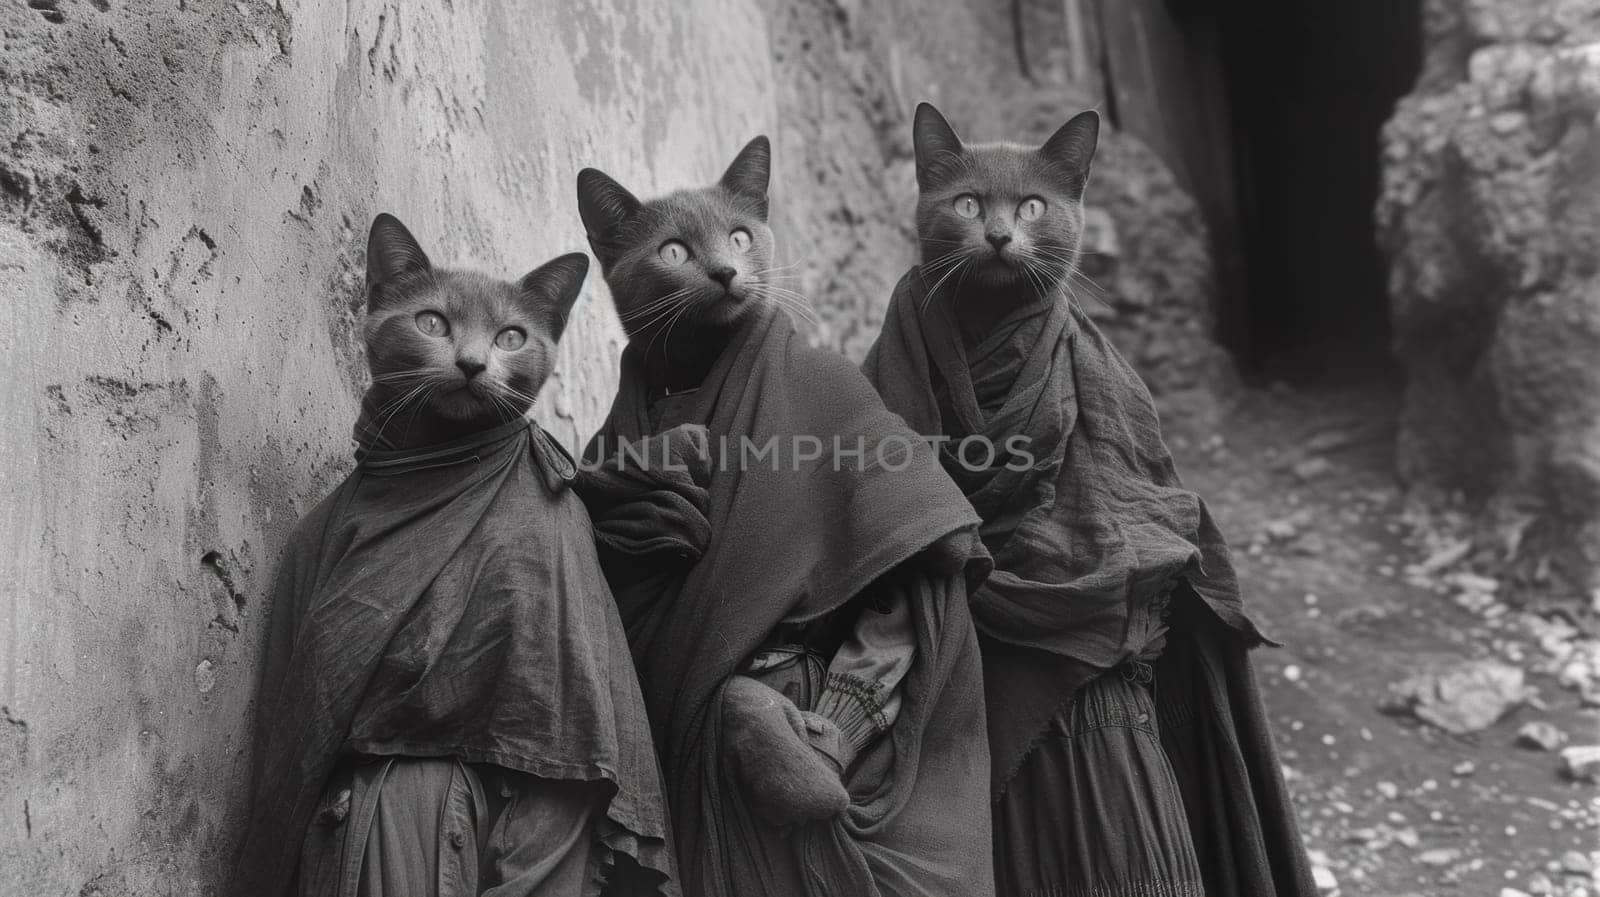 Three cats dressed in robes and hoods standing next to a wall, AI by starush